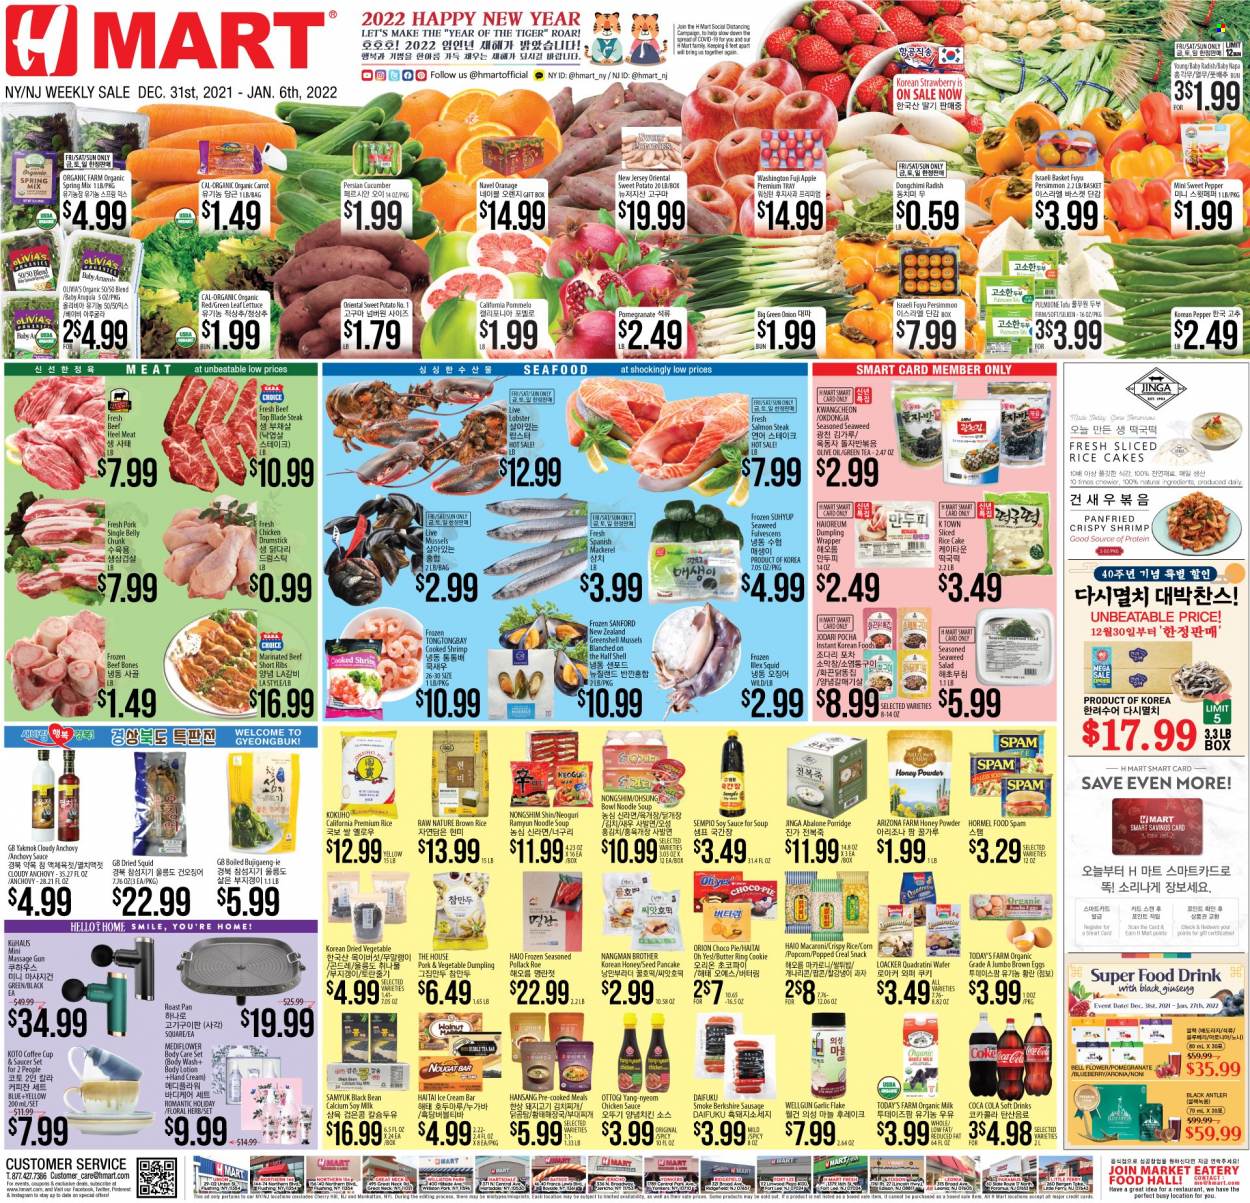 thumbnail - Hmart Flyer - 12/31/2021 - 01/06/2022 - Sales products - persimmons, corn, garlic, sweet potato, potatoes, Fuji apple, lobster, mackerel, mussels, salmon, squid, pollock, seafood, shrimps, abalone, macaroni, soup, pancakes, dumplings, noodles cup, noodles, Hormel, sausage, Spam, tofu, soy milk, organic milk, eggs, butter, wafers, snack, nougat, popcorn, seaweed, anchovies, porridge, brown rice, soy sauce, olive oil, oil, honey, Coca-Cola, AriZona, green tea, tea, beef meat, beef ribs, steak, top blade, marinated beef, body wash, body lotion, hand cream, basket, wrapper, pan, saucer, coffee cup, cup, Brother, calcium, pomegranate. Page 1.